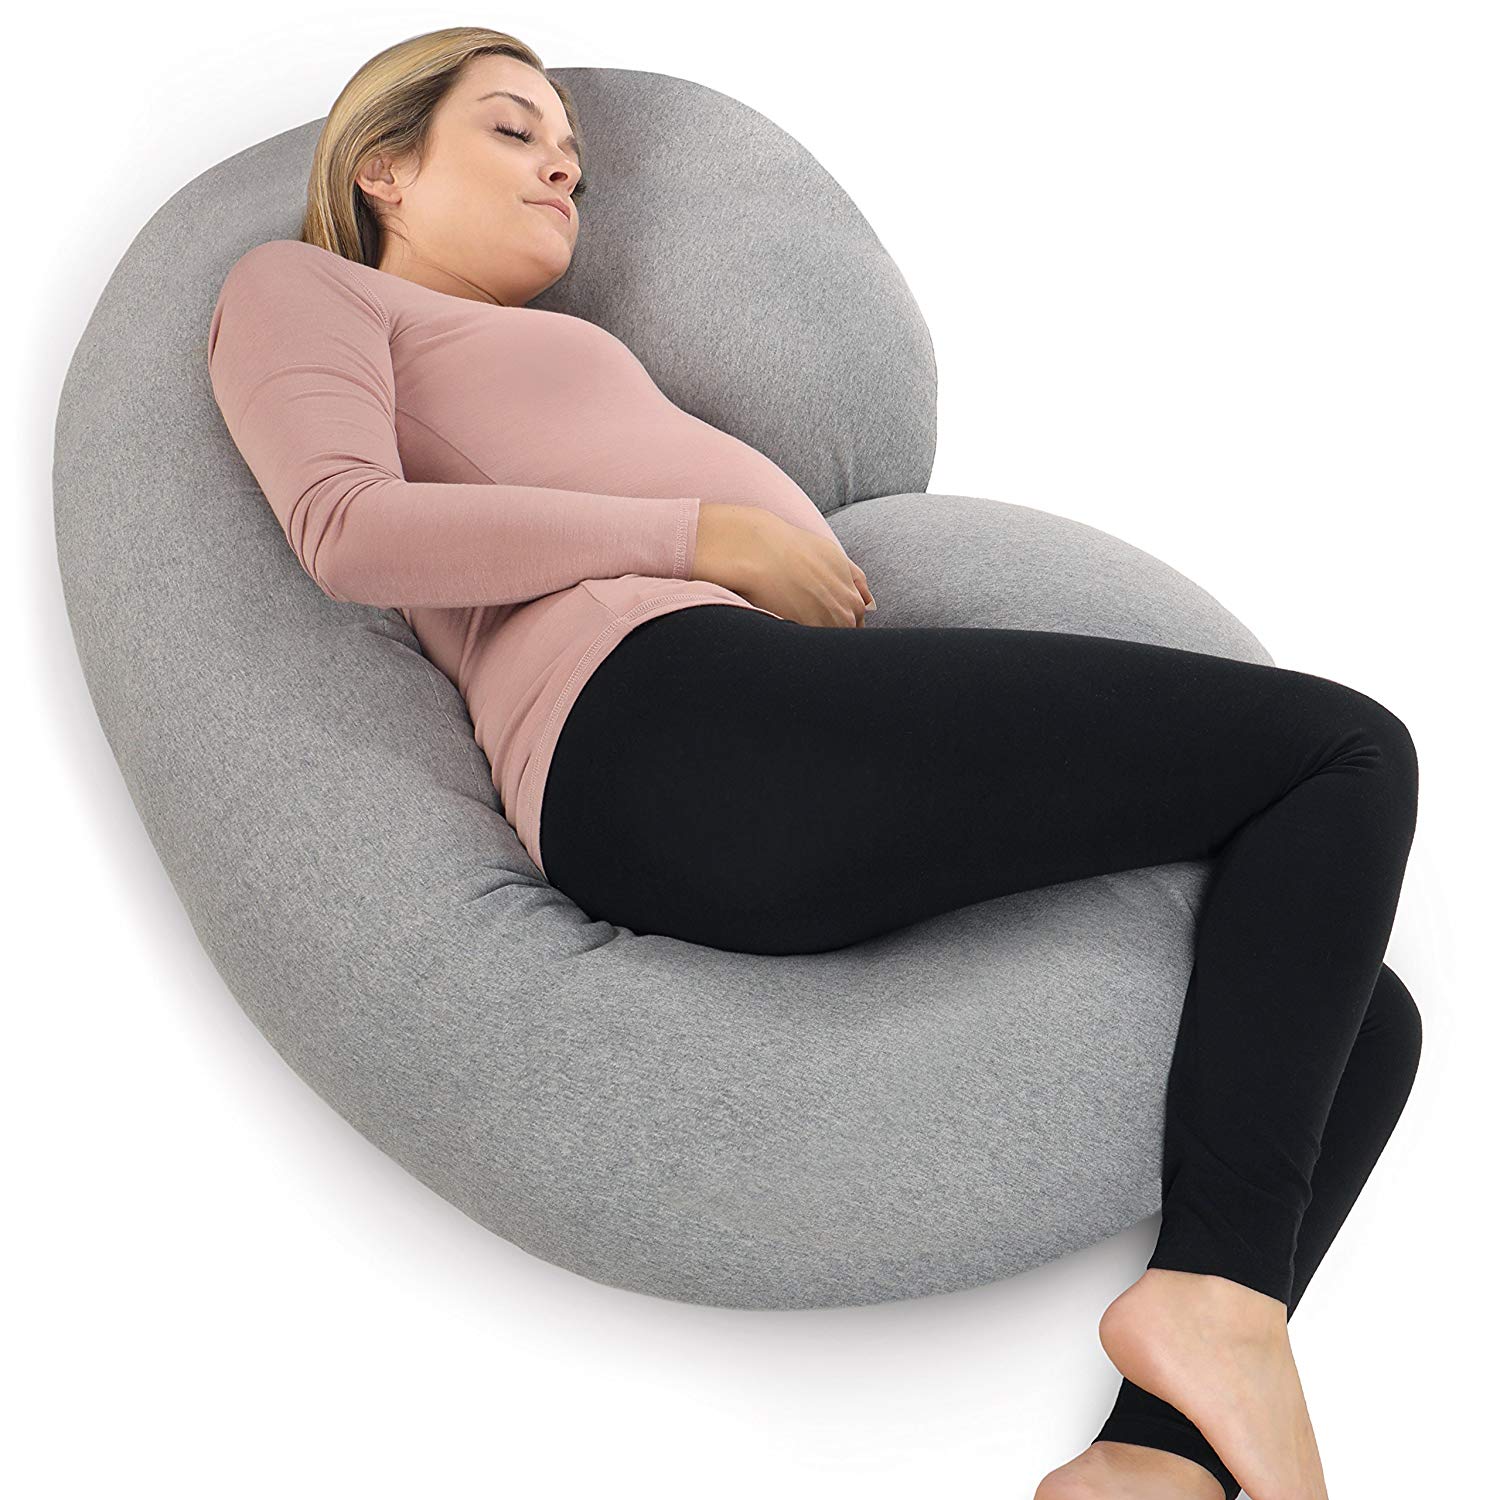 The Best Maternity Pillows You Can Buy on Amazon â SheKnows